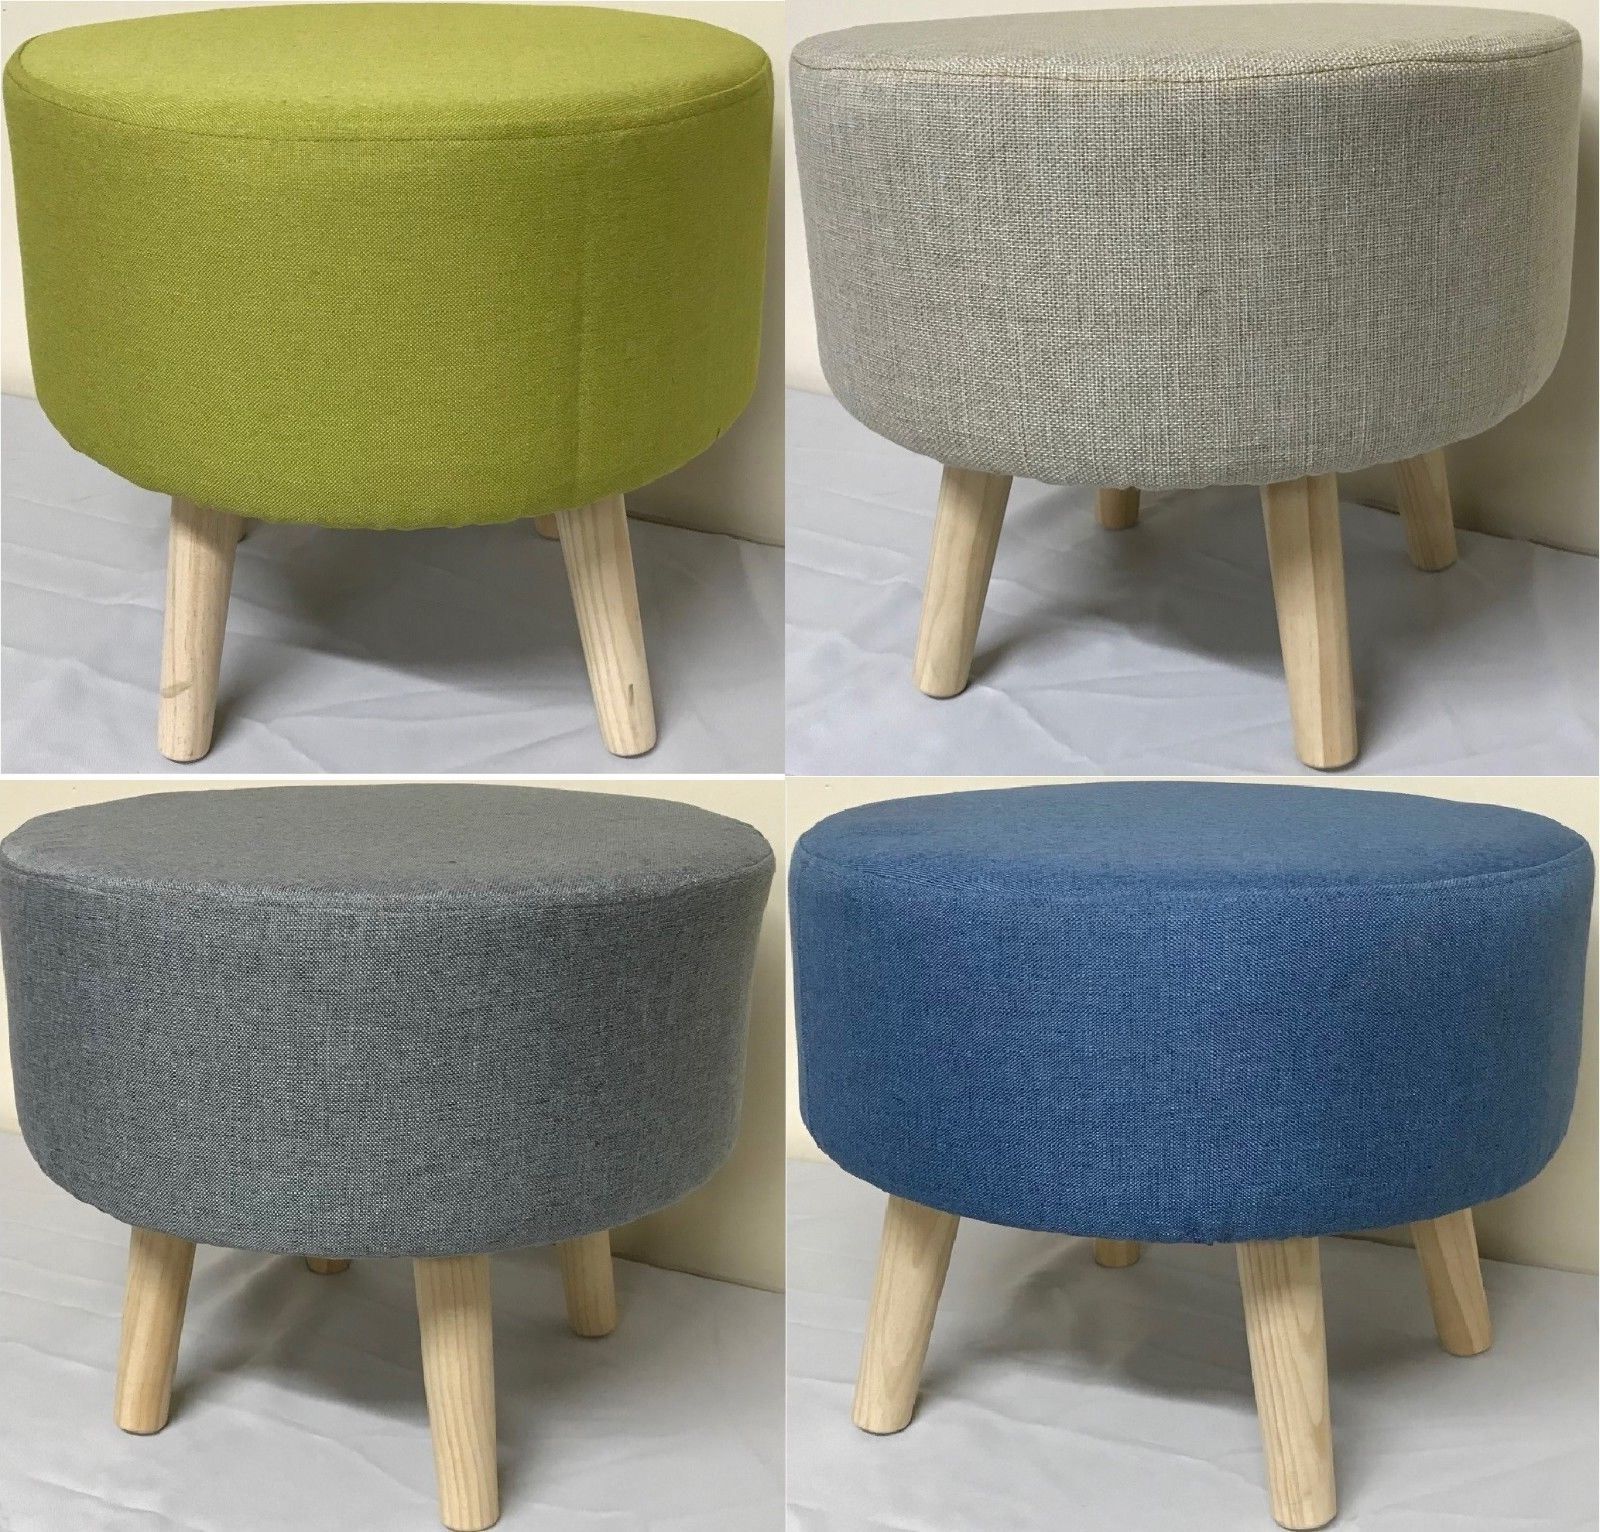 Modern Coloured Upholstered Footstool Ottoman Pouffe Stool Wooden 4 With Regard To 2017 Wooden Legs Ottomans (View 4 of 10)